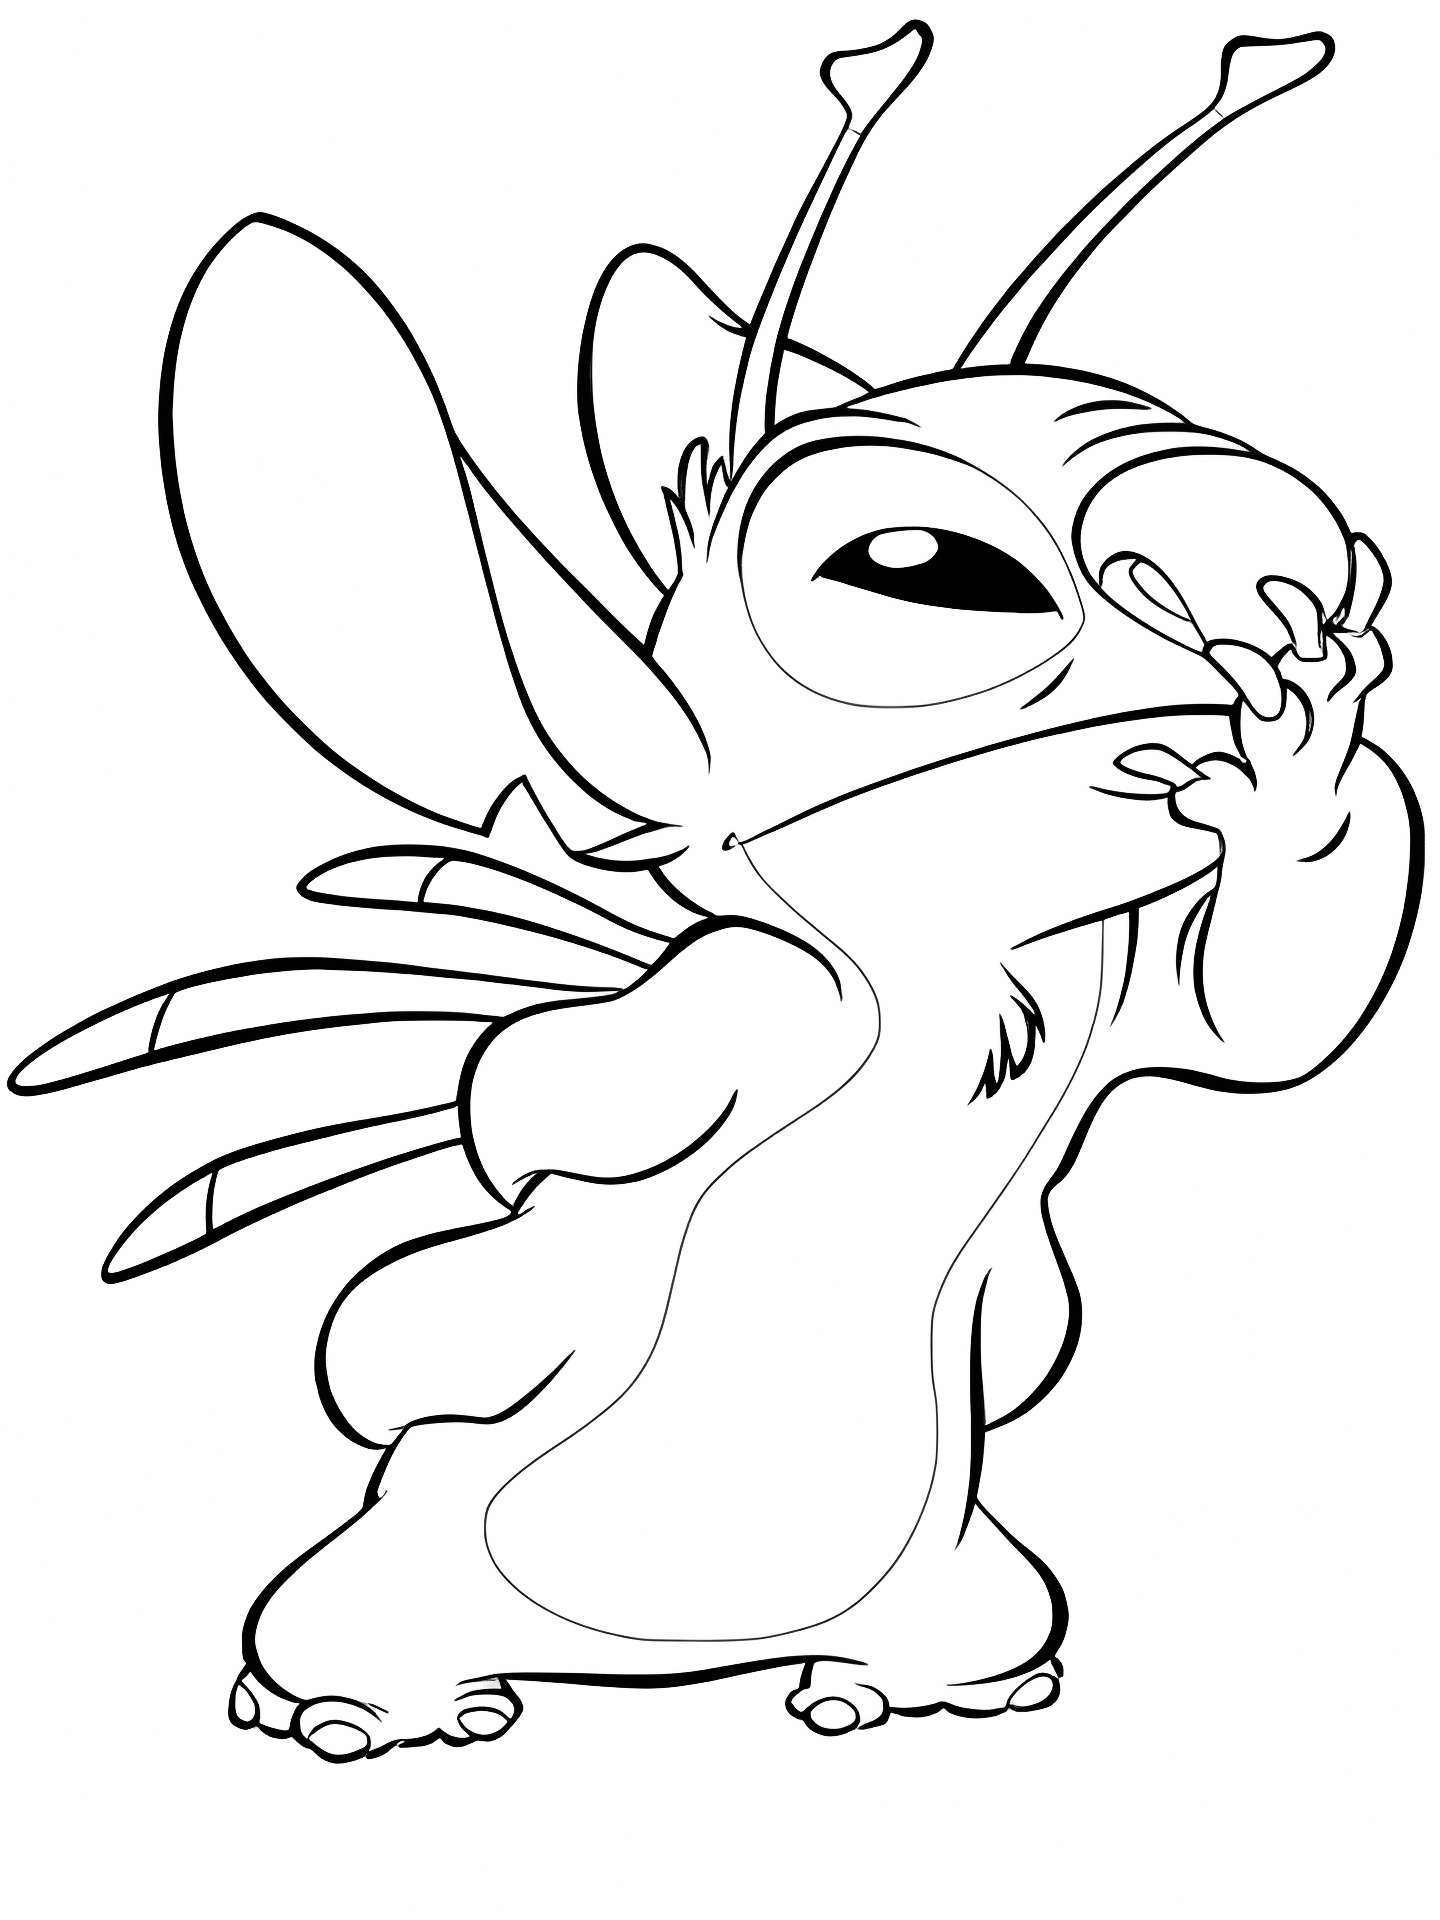 Lilo & Stitch 24  coloring page to print and coloring